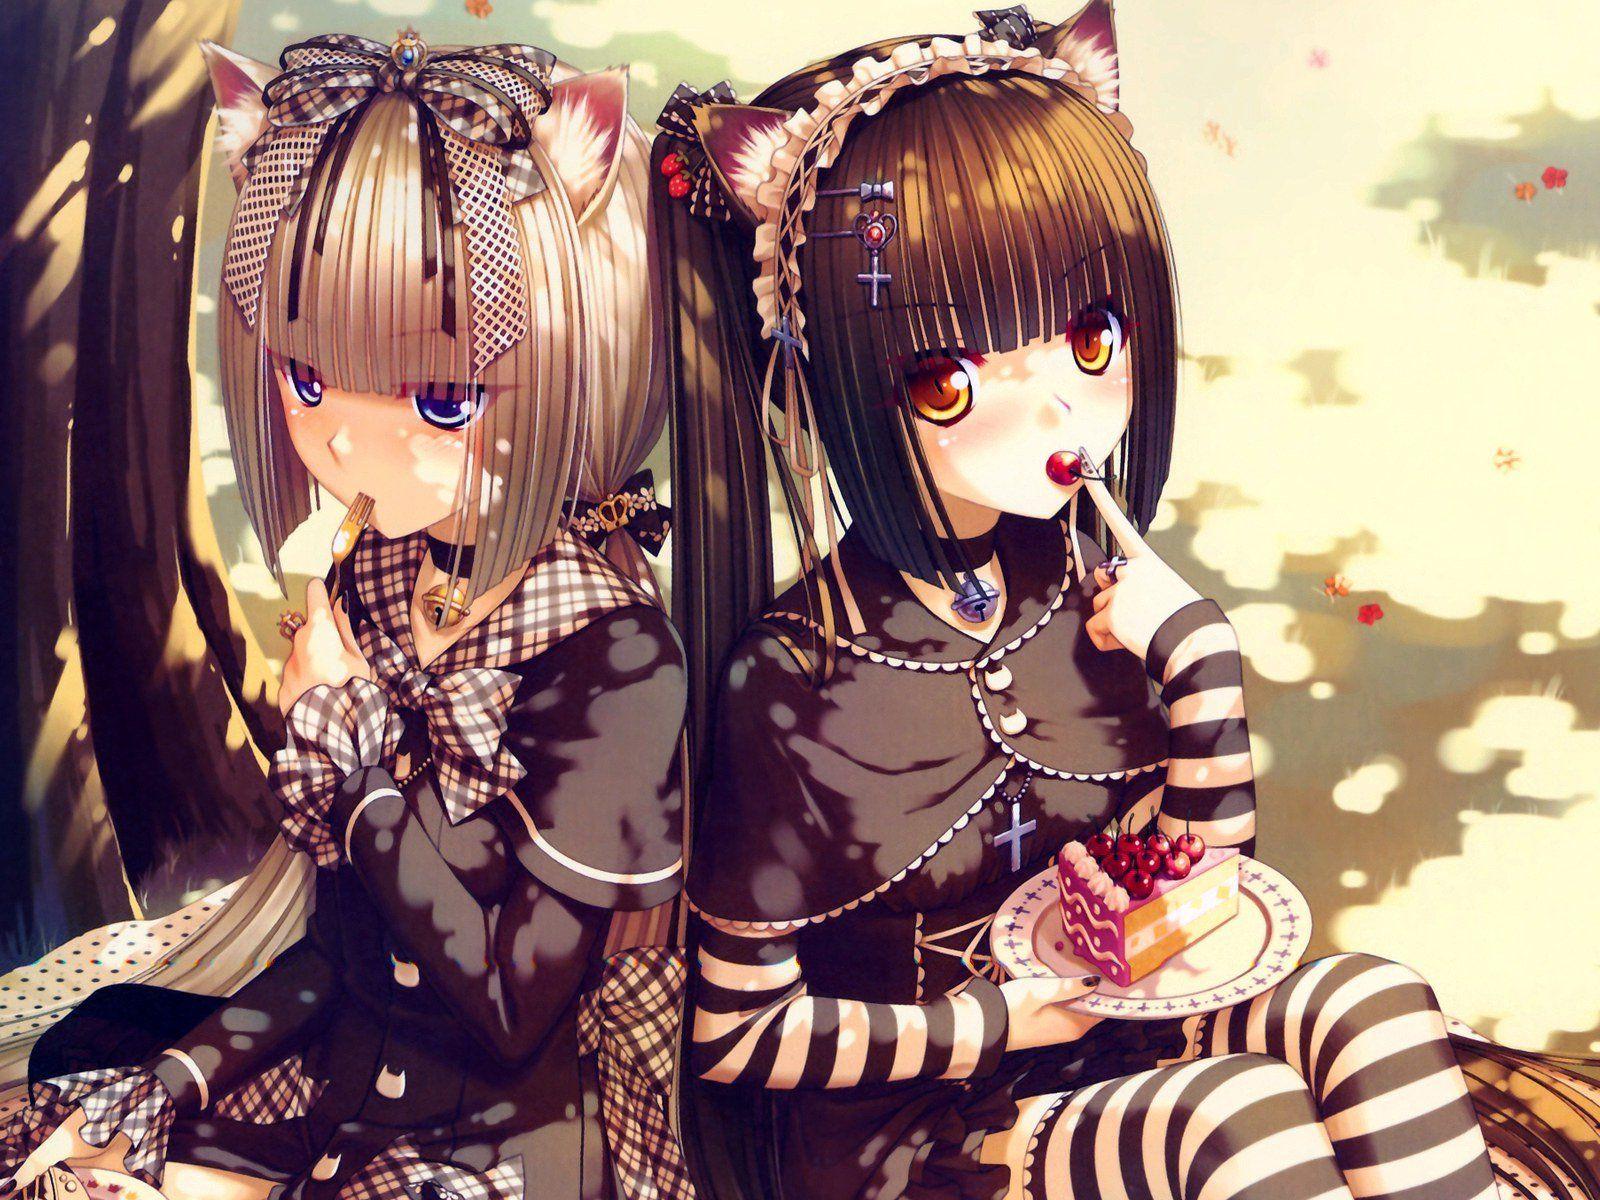 Japanese Anime Widescreen Wallpapers - Top Free Japanese Anime ...